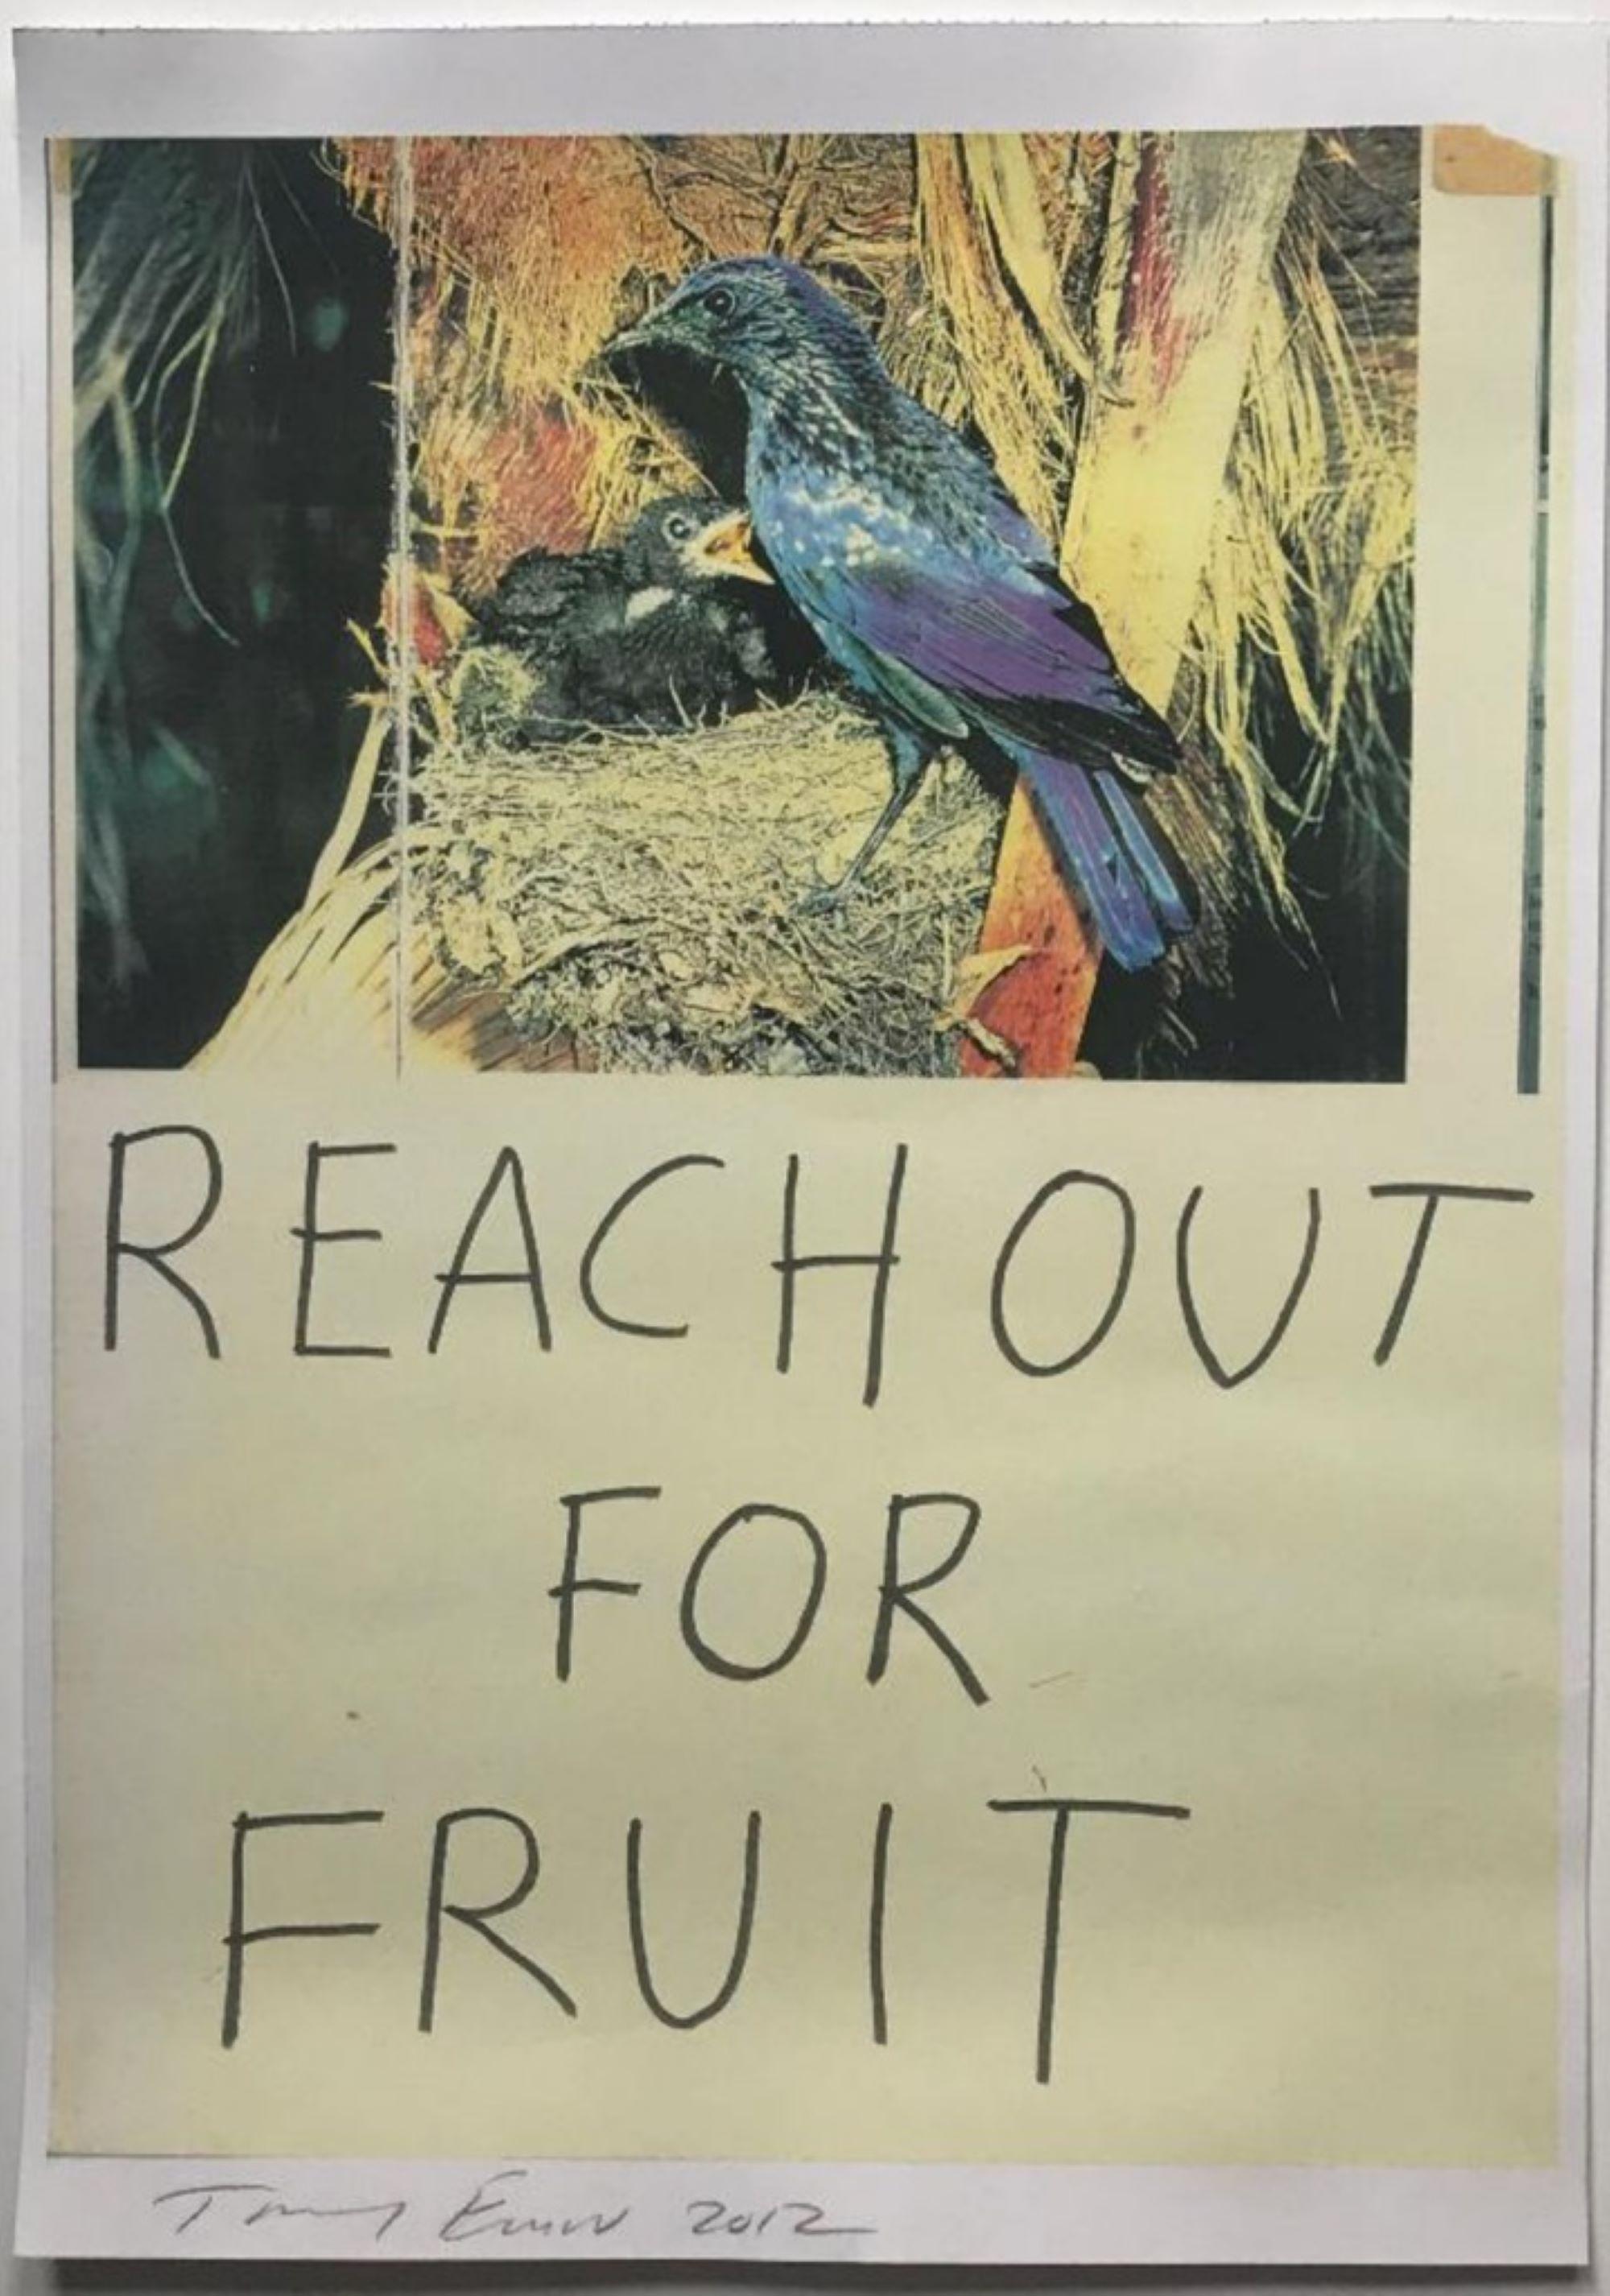 Tracey Emin Figurative Print - Reach Out for Fruit